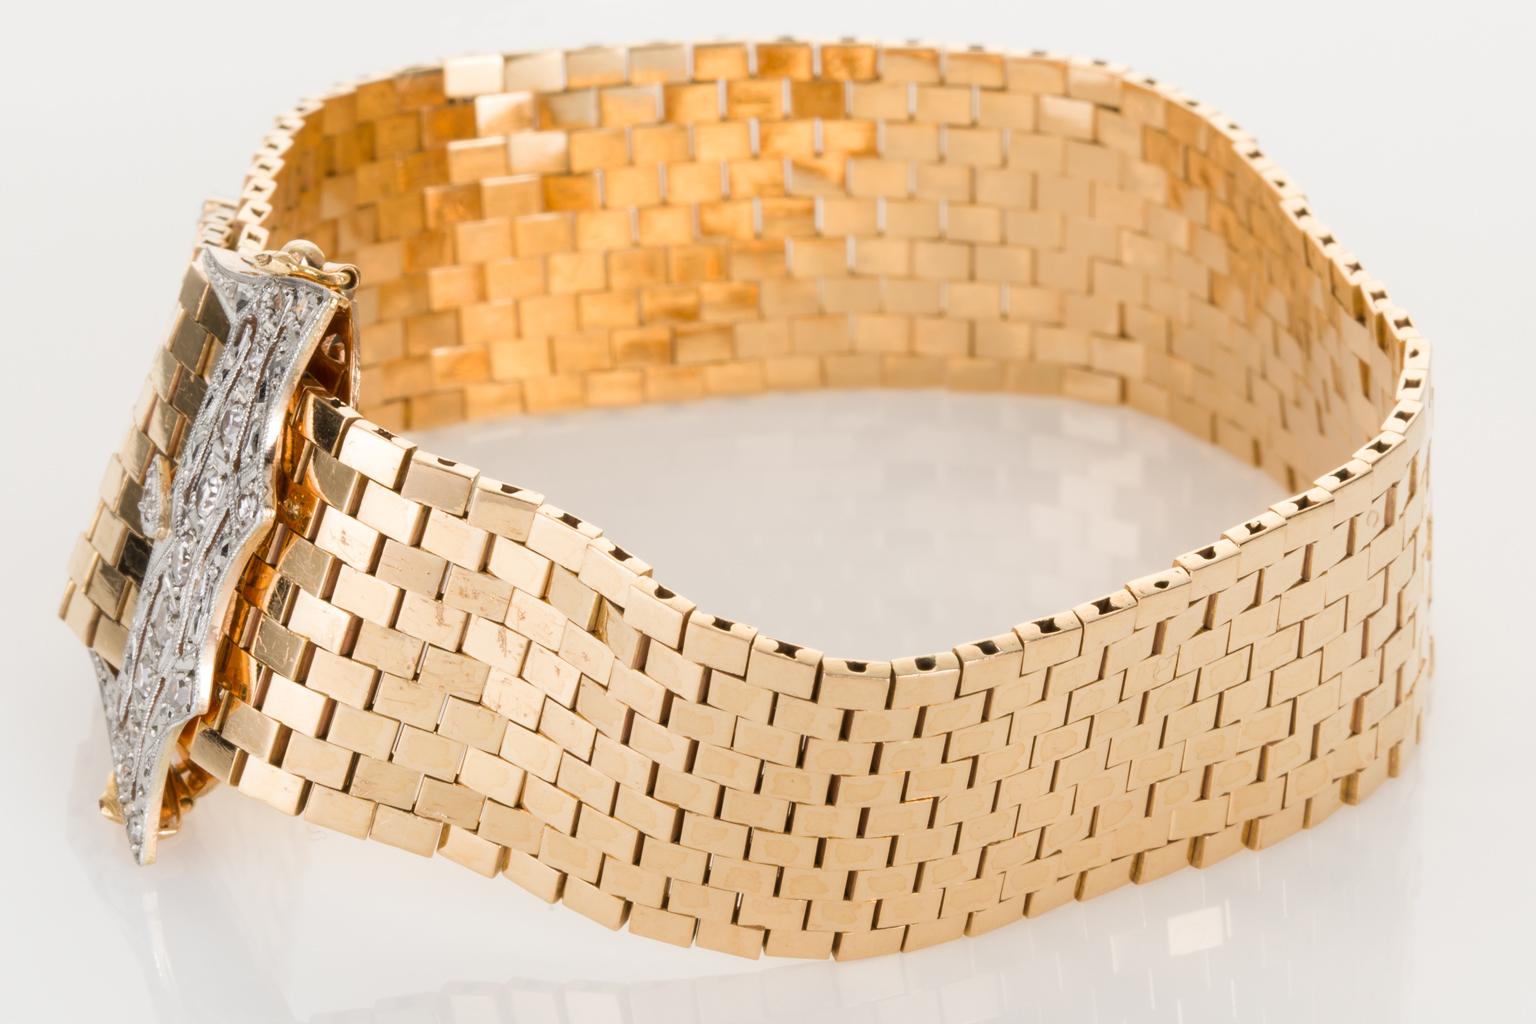 A gorgeous design that dates back to the 1960's and 70's, this fabulously stylish belt bracelet is ultra cool. The brickwork gold design makes it so wearable as it sits flat. It just moulds to the shape of your arm and feels like silk, bracelets are